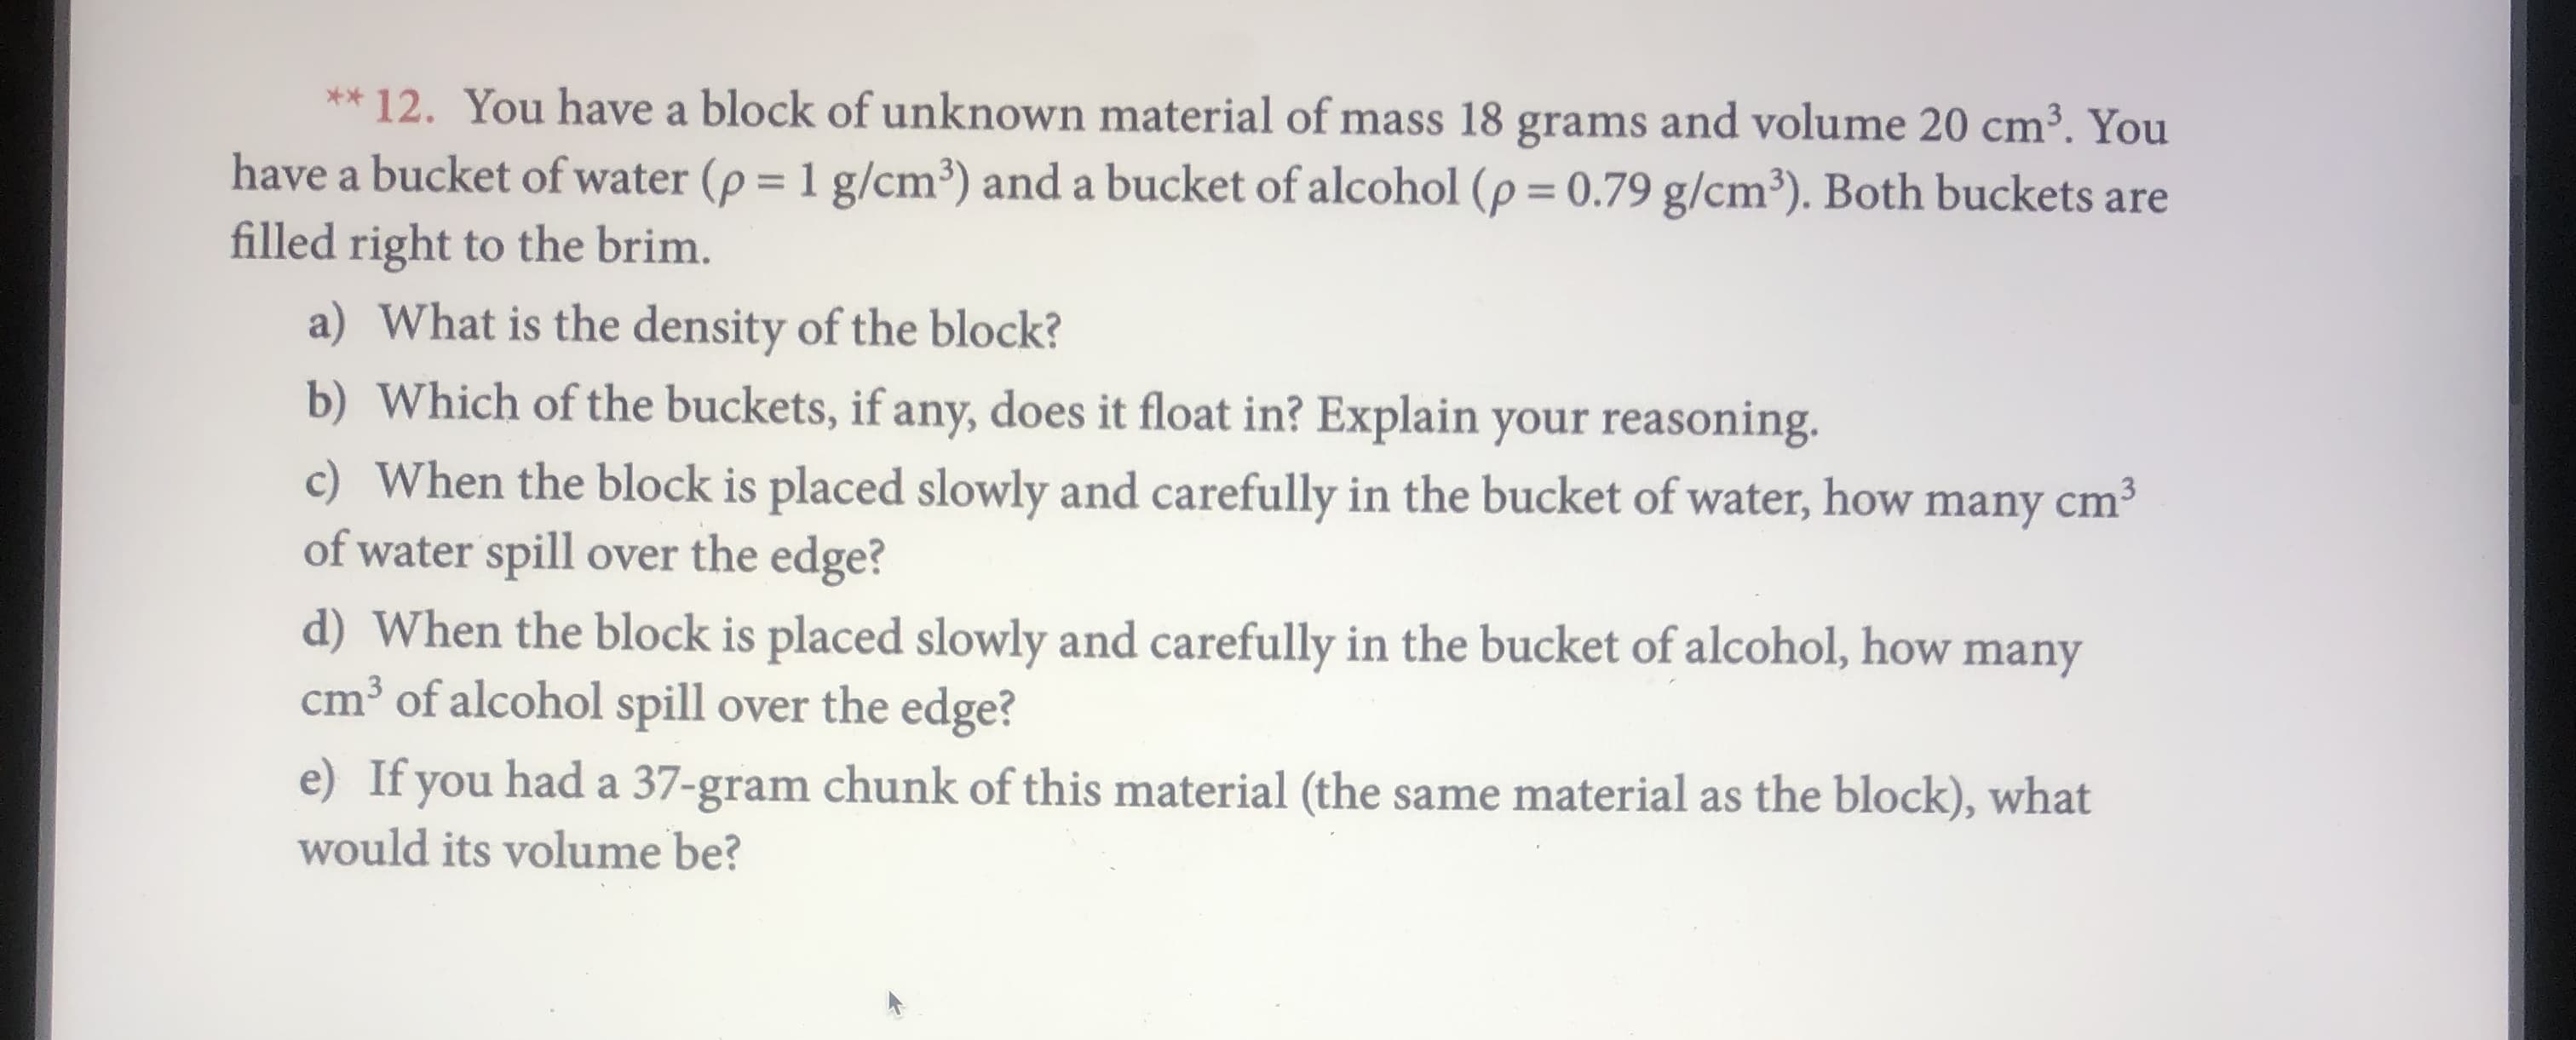 ** 12. You have a block of unknown material of mass 18 grams and volume 20 cm3. You
have a bucket of water (p
filled right to the brim.
1 g/cm3) and a bucket of alcohol (p = 0.79 g/cm3). Both buckets are
a) What is the density of the block?
b) Which of the buckets, if any, does it float in? Explain your reasoning
c) When the block is placed slowly and carefully in the bucket of water, how many cm3
of water spill over the edge?
d) When the block is placed slowly and carefully in the bucket of alcohol, how many
cm3
of alcohol spill over the edge?
e) If you had a 37-gram chunk of this material (the same material as the block), what
would its volume be?
